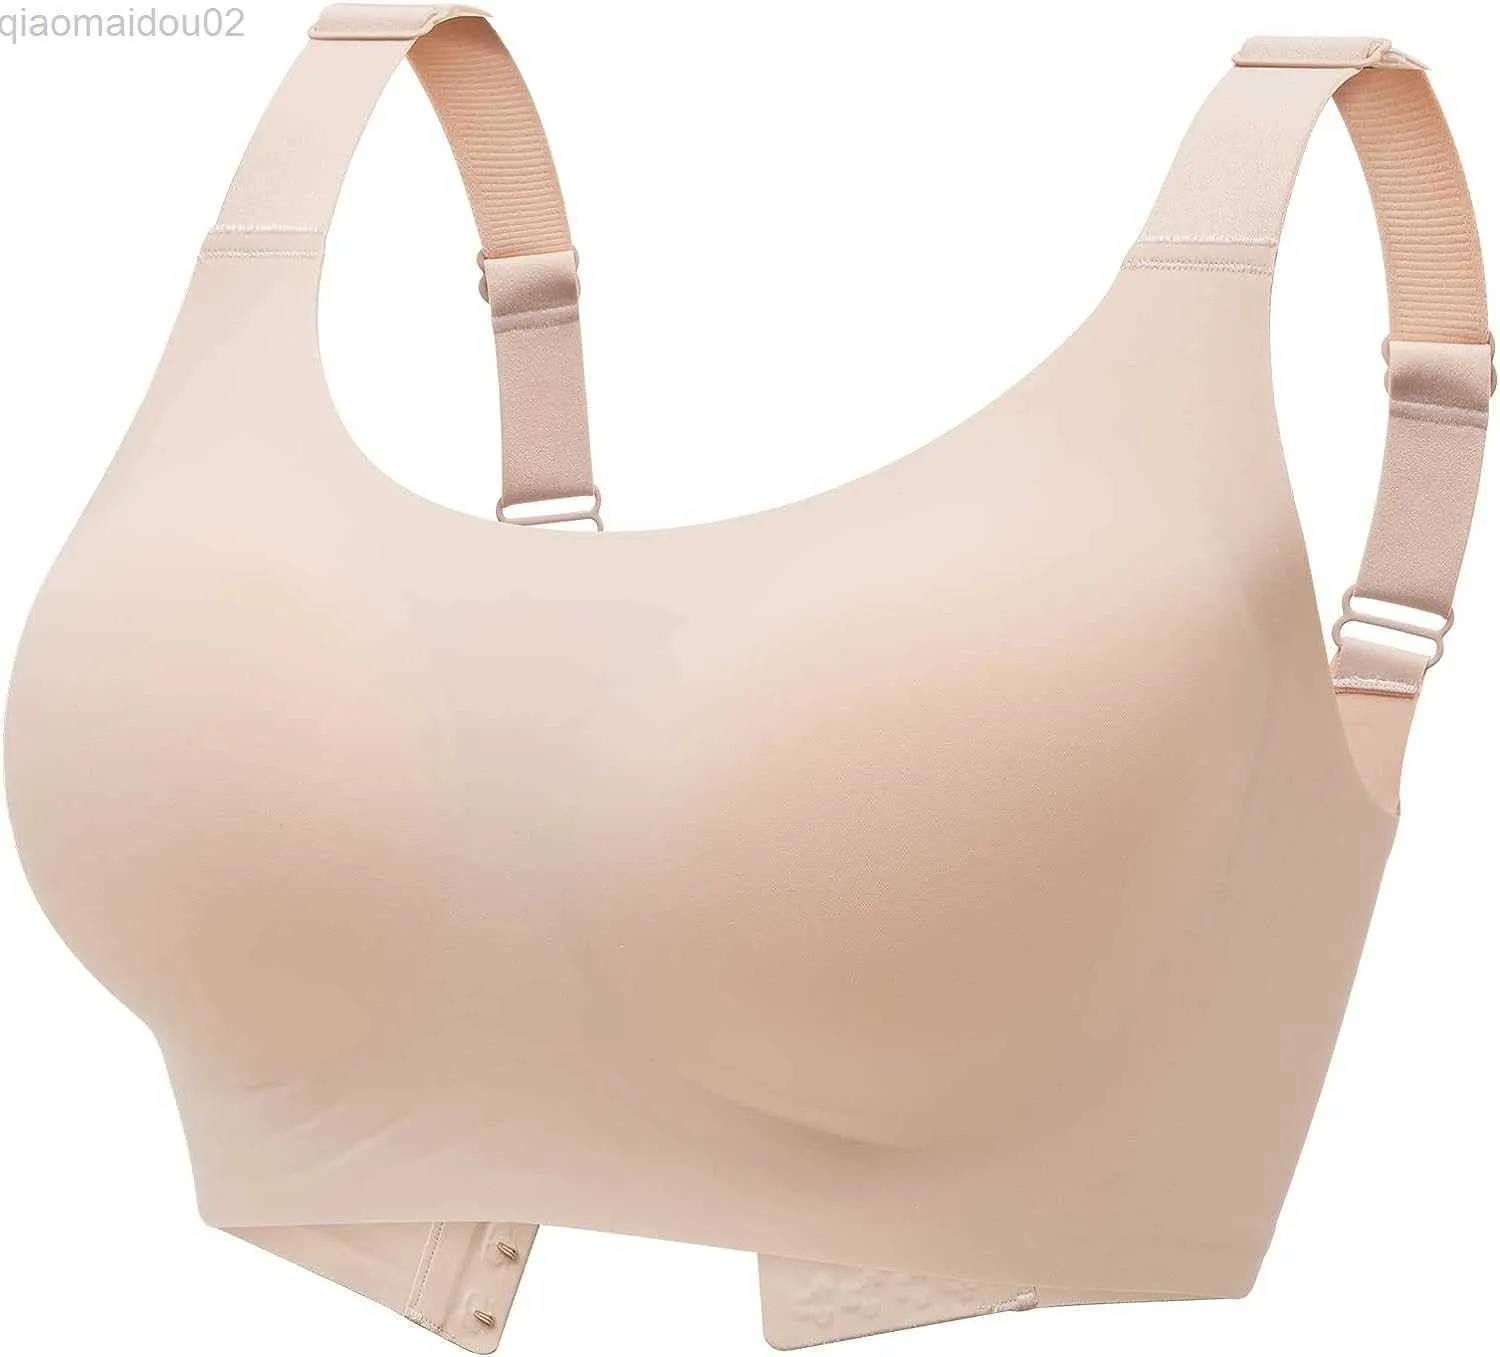 Bras Gailife Silk Smooth Womens Bra Full Cover Bra Without Steel